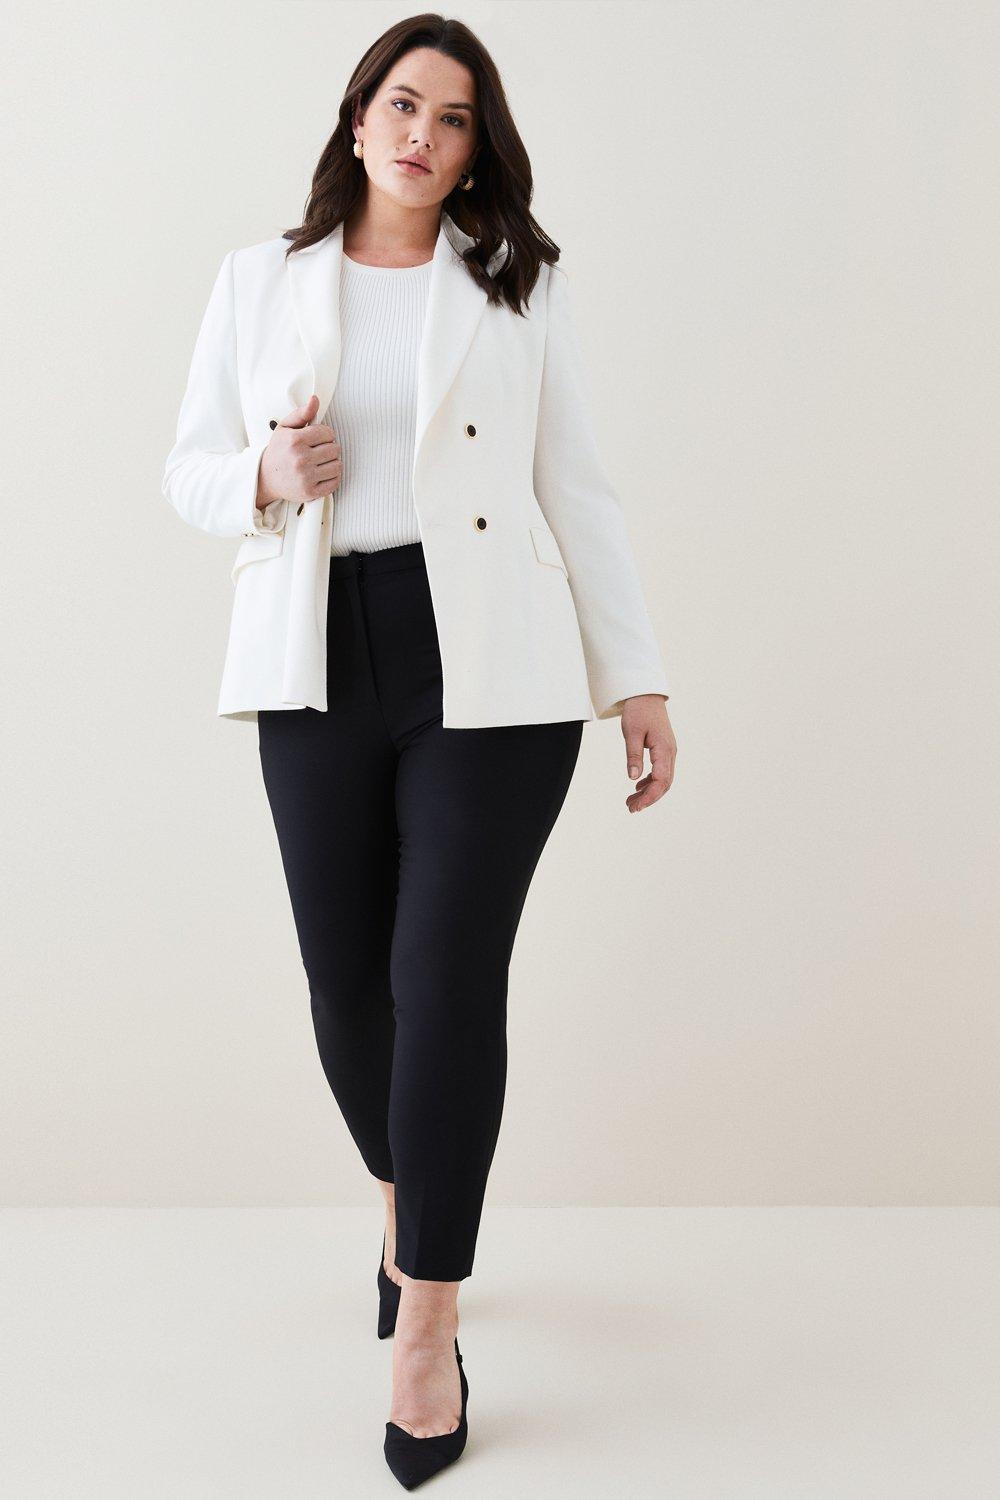 Plus Size Corporate Business Professional Looks